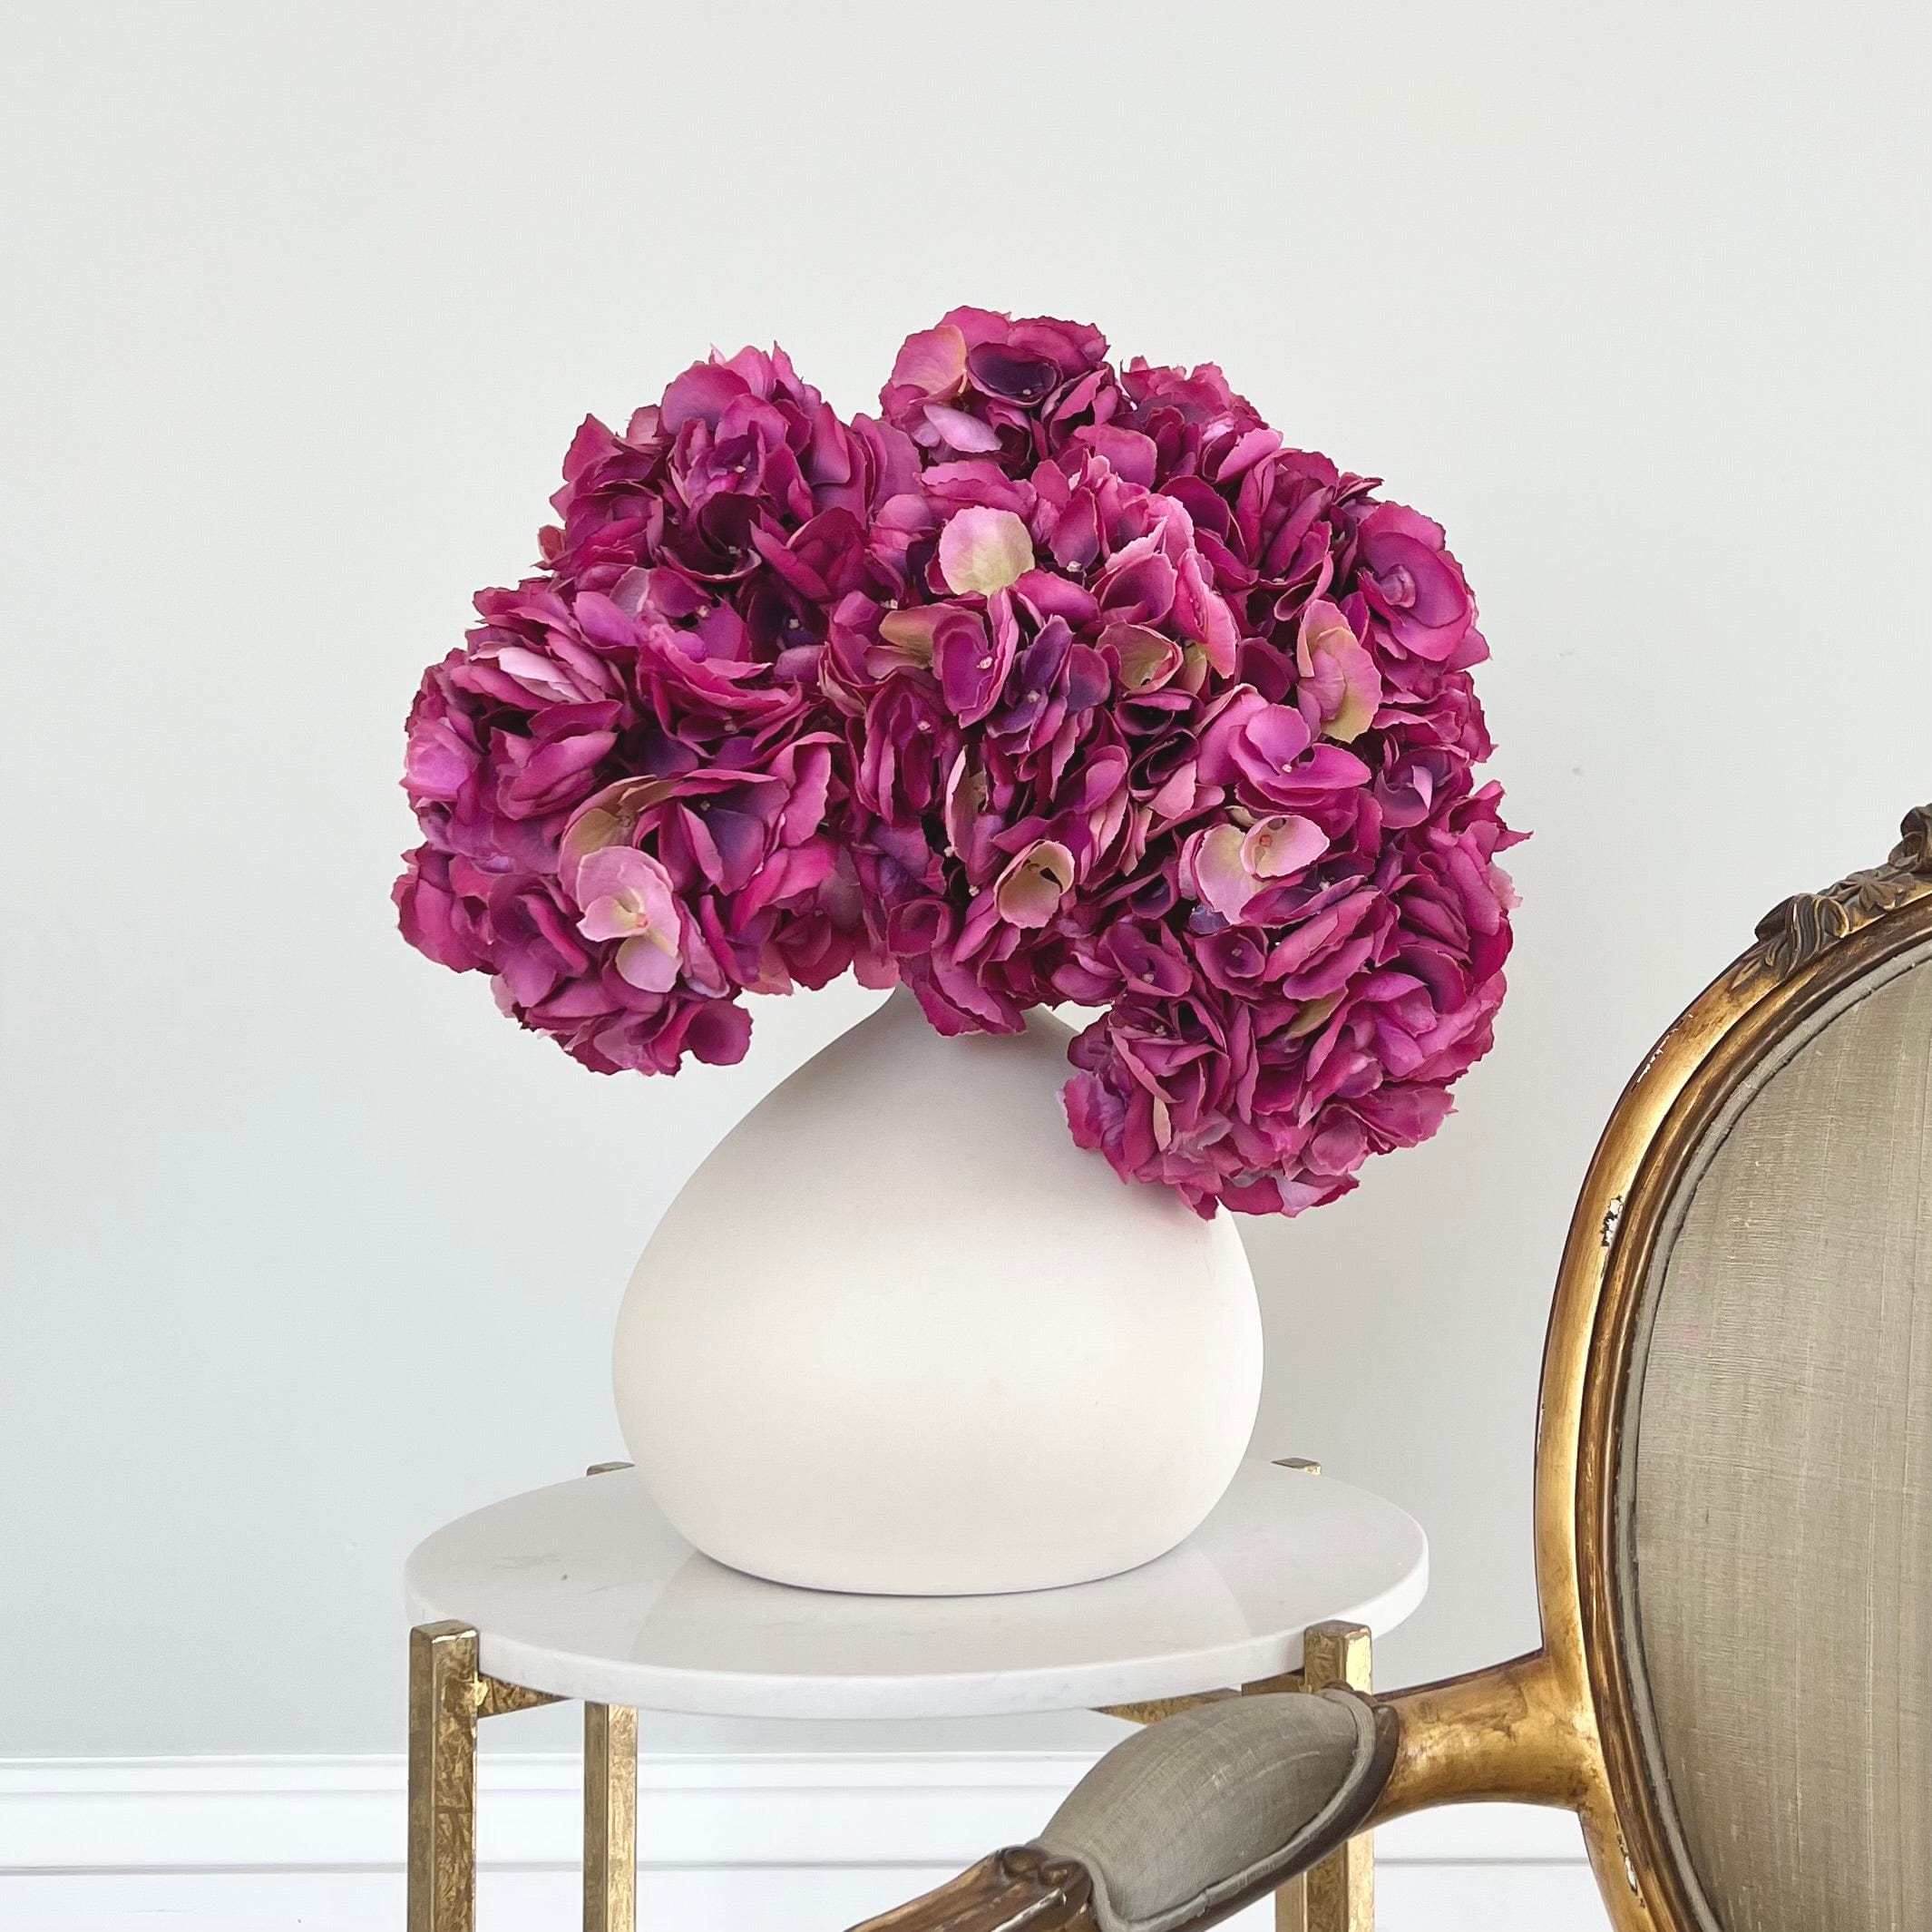 Luxury Lifelike Realistic Artificial Fabric Silk Blooms with Foliage Buy Online from The Faux Flower Company | 7 stems of Fuchsia Mophead Hydrangea ABY8306FP styled in Ceramic Matte White Burford Vase ABP1747